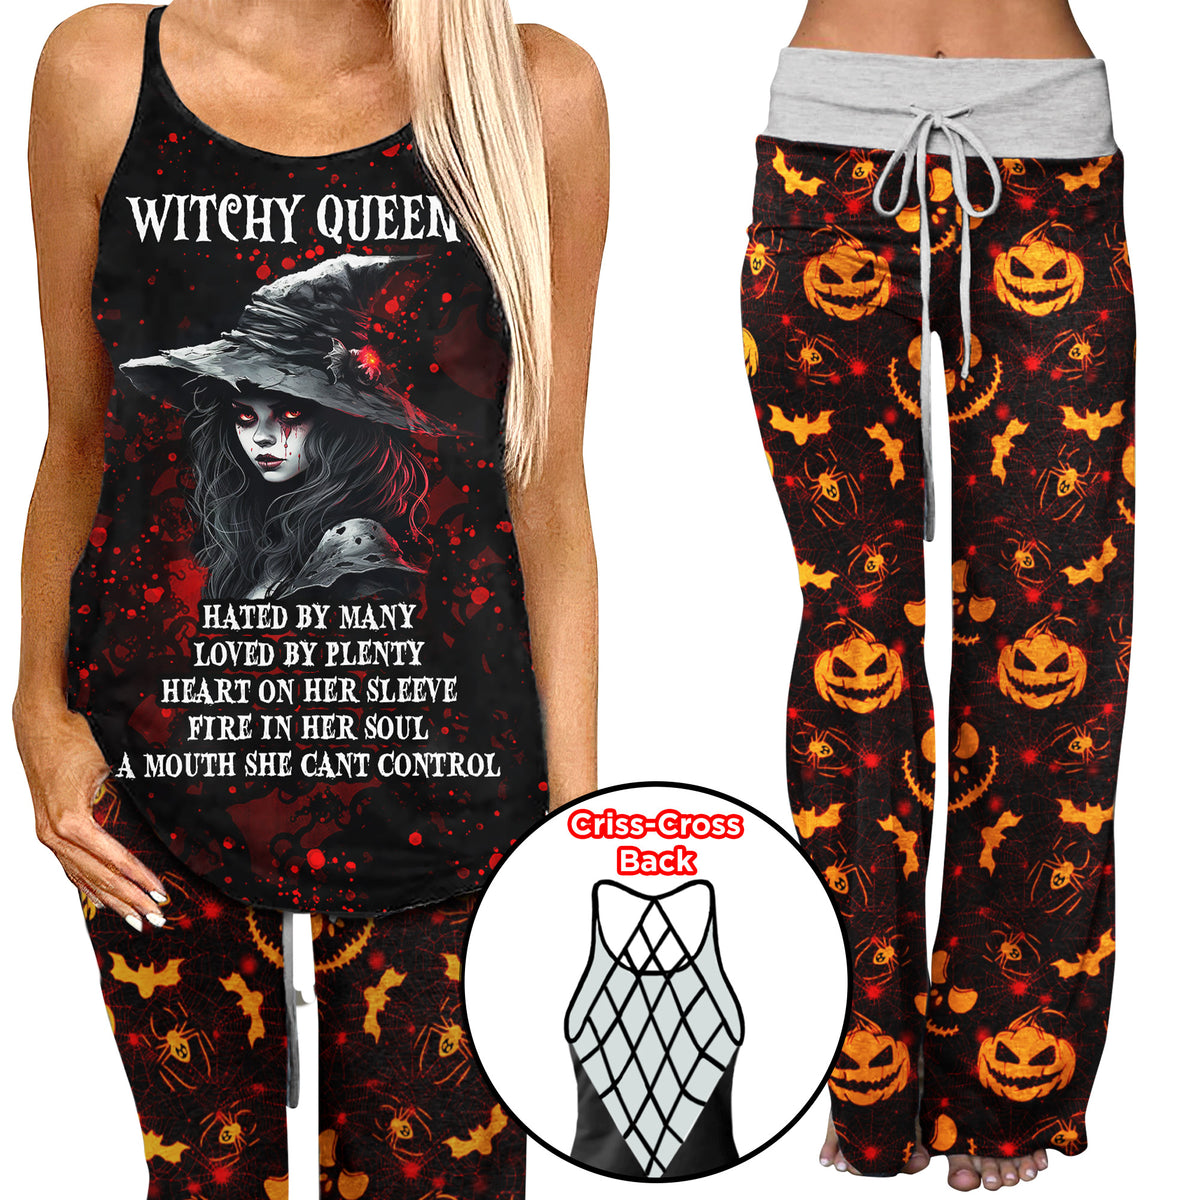 Witchy Queen Blood Halloween Backless tanktop and Wide Pants Sets - Wonder Skull